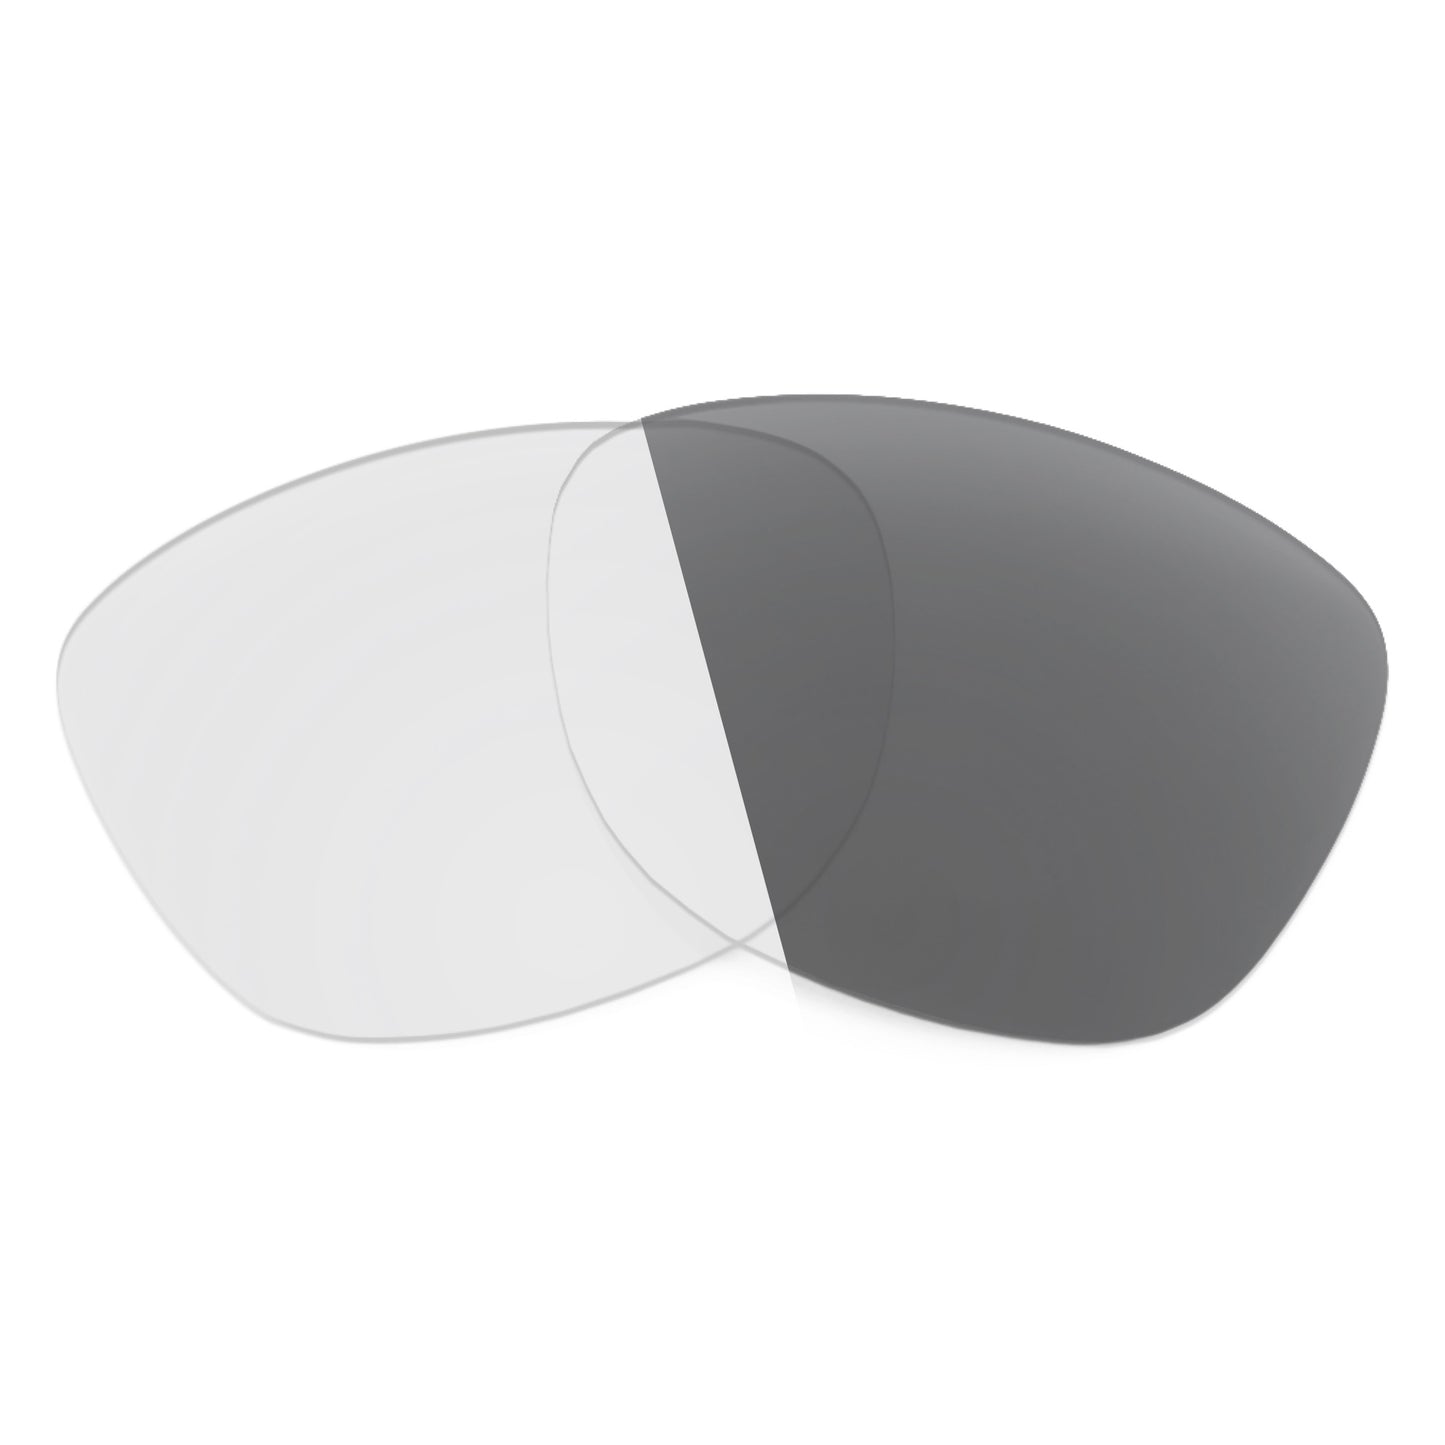 Revant replacement lenses for Ray-Ban RB4305 53mm Non-Polarized Adapt Gray Photochromic